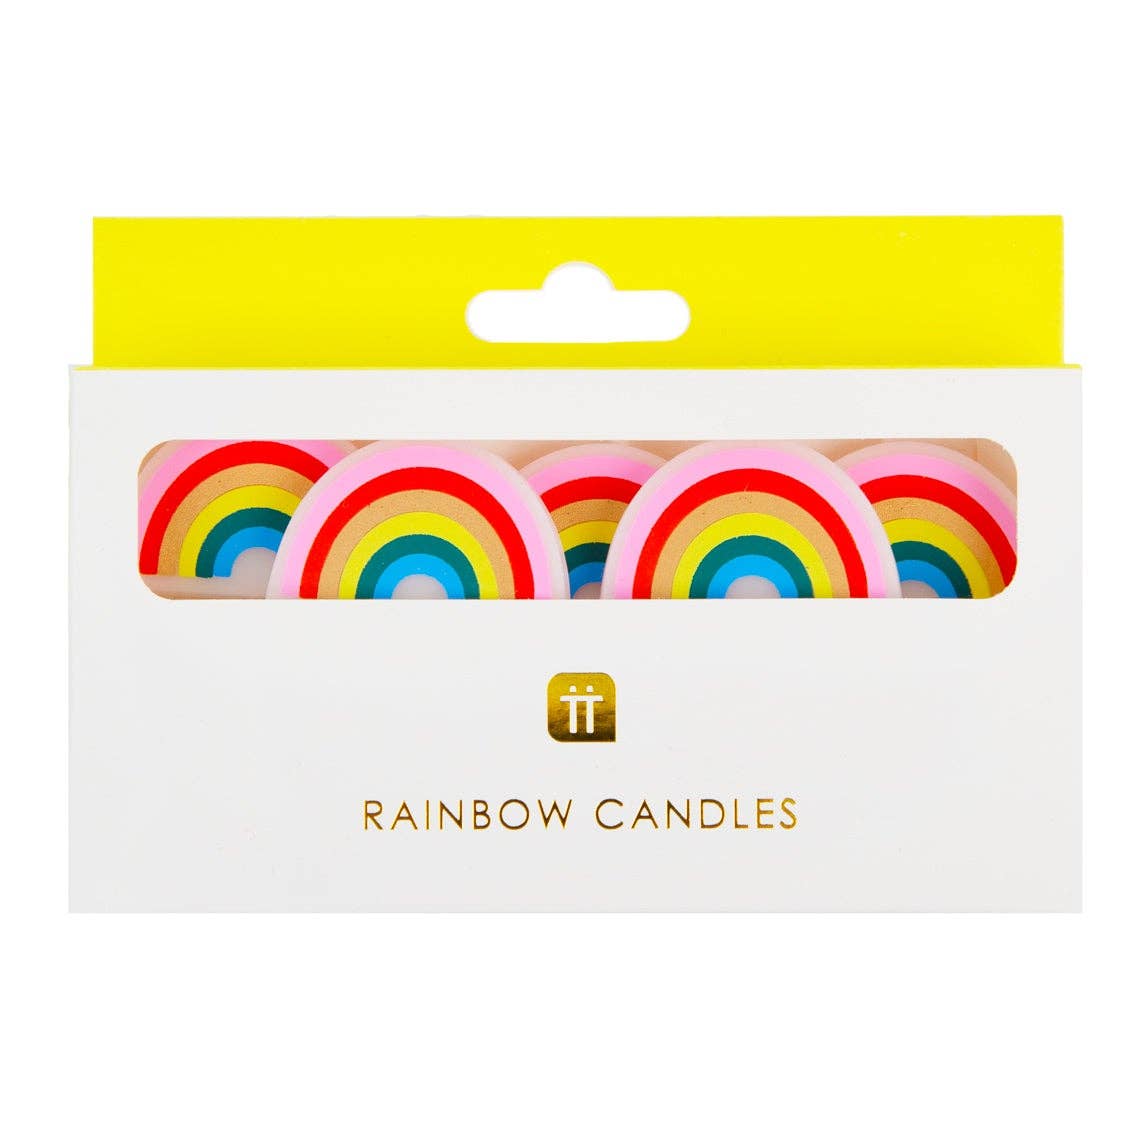 Rainbow Shaped Candles - 5 Pack -  - Who said